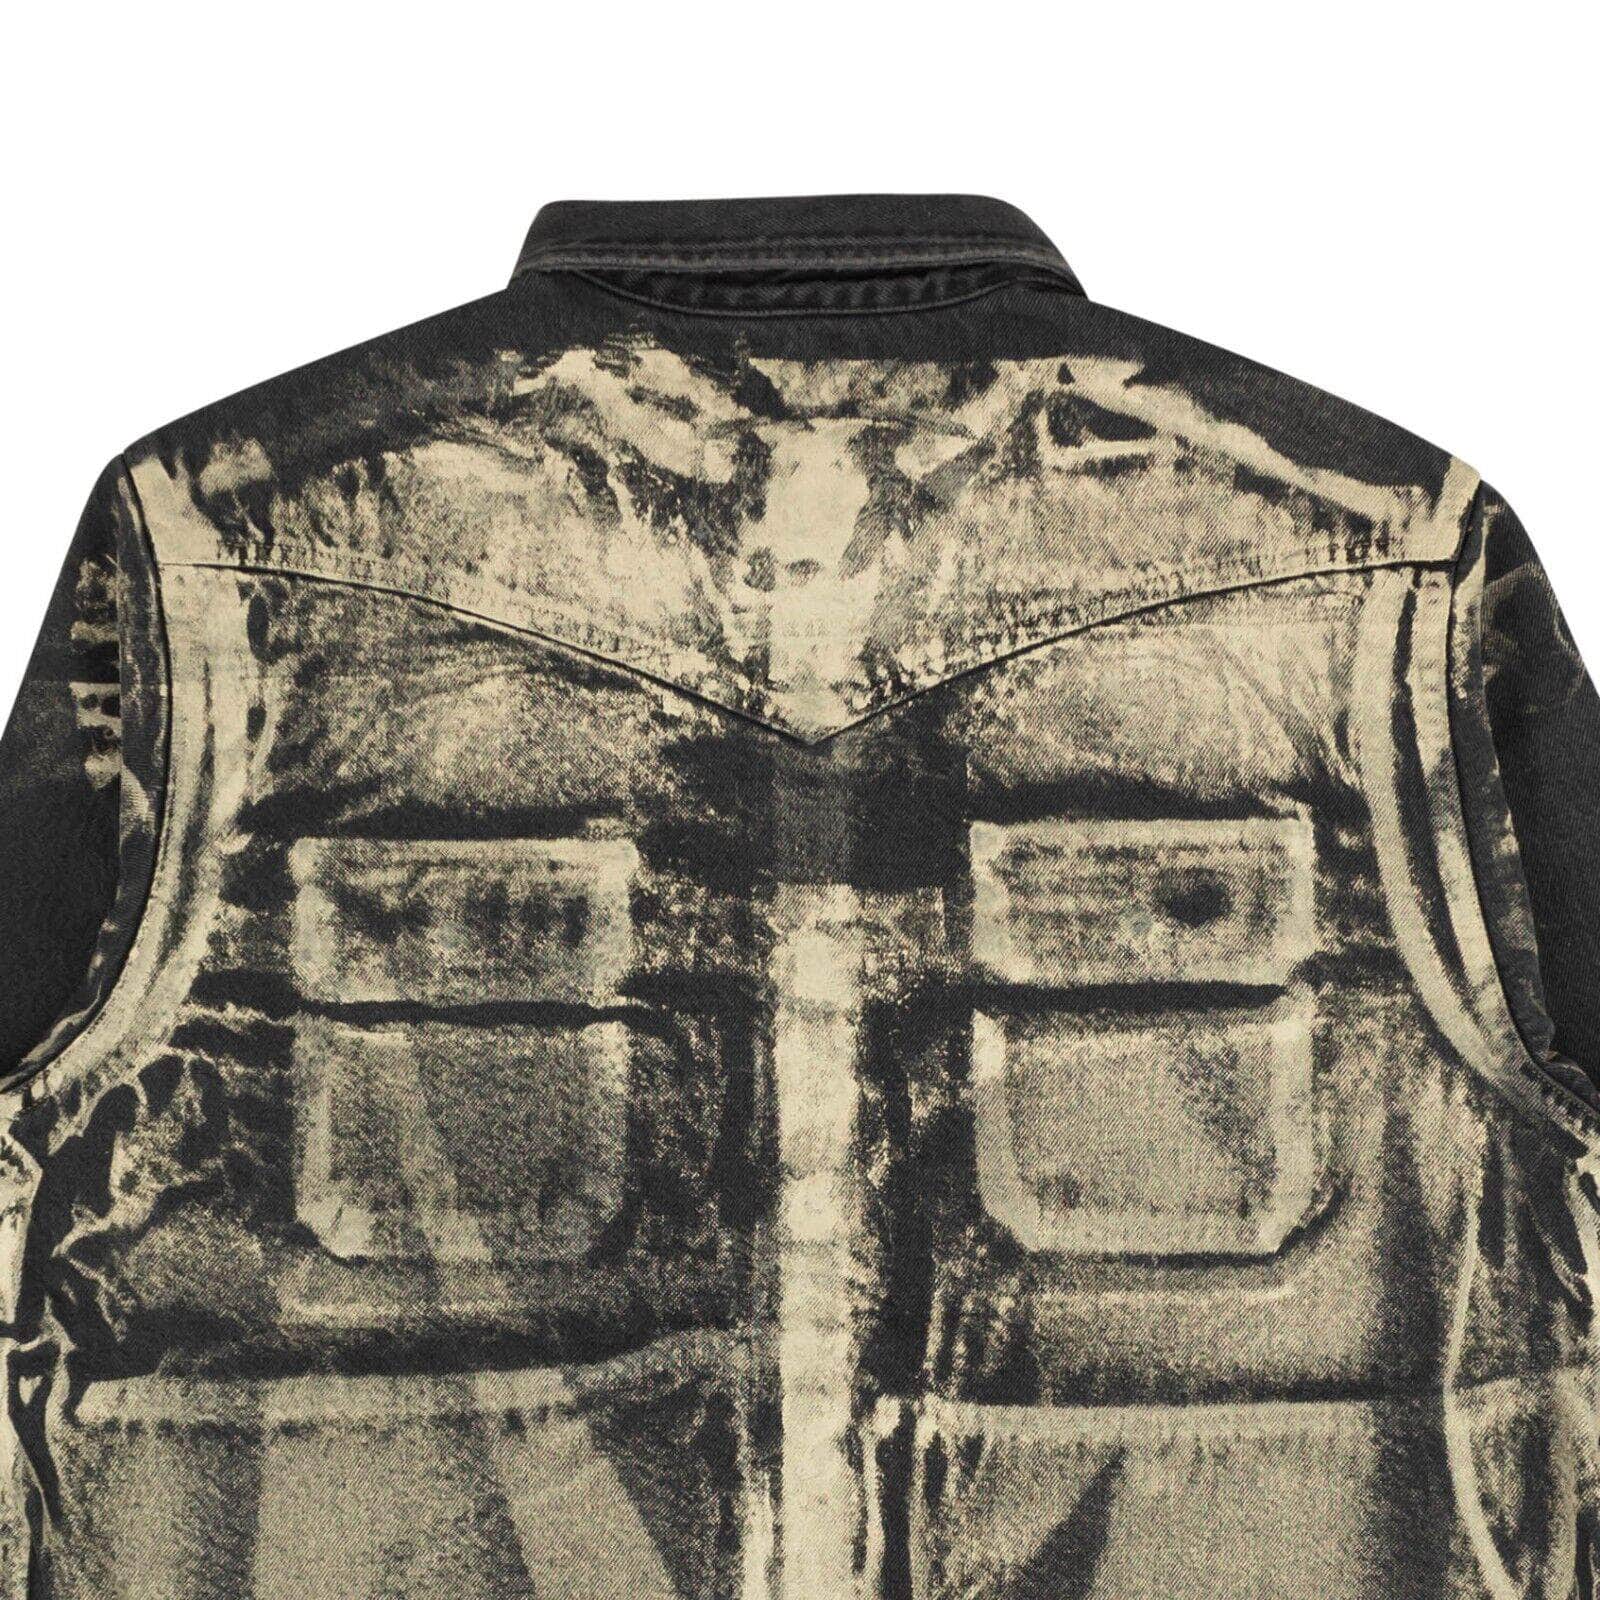 424 ON FAIRFAX 424-on-fairfax, 500-750, channelenable-all, chicmi, couponcollection, gender-mens, main-clothing, mens-shoes, size-l, size-m, size-s, size-xl Black Painted White Denim Workshirt